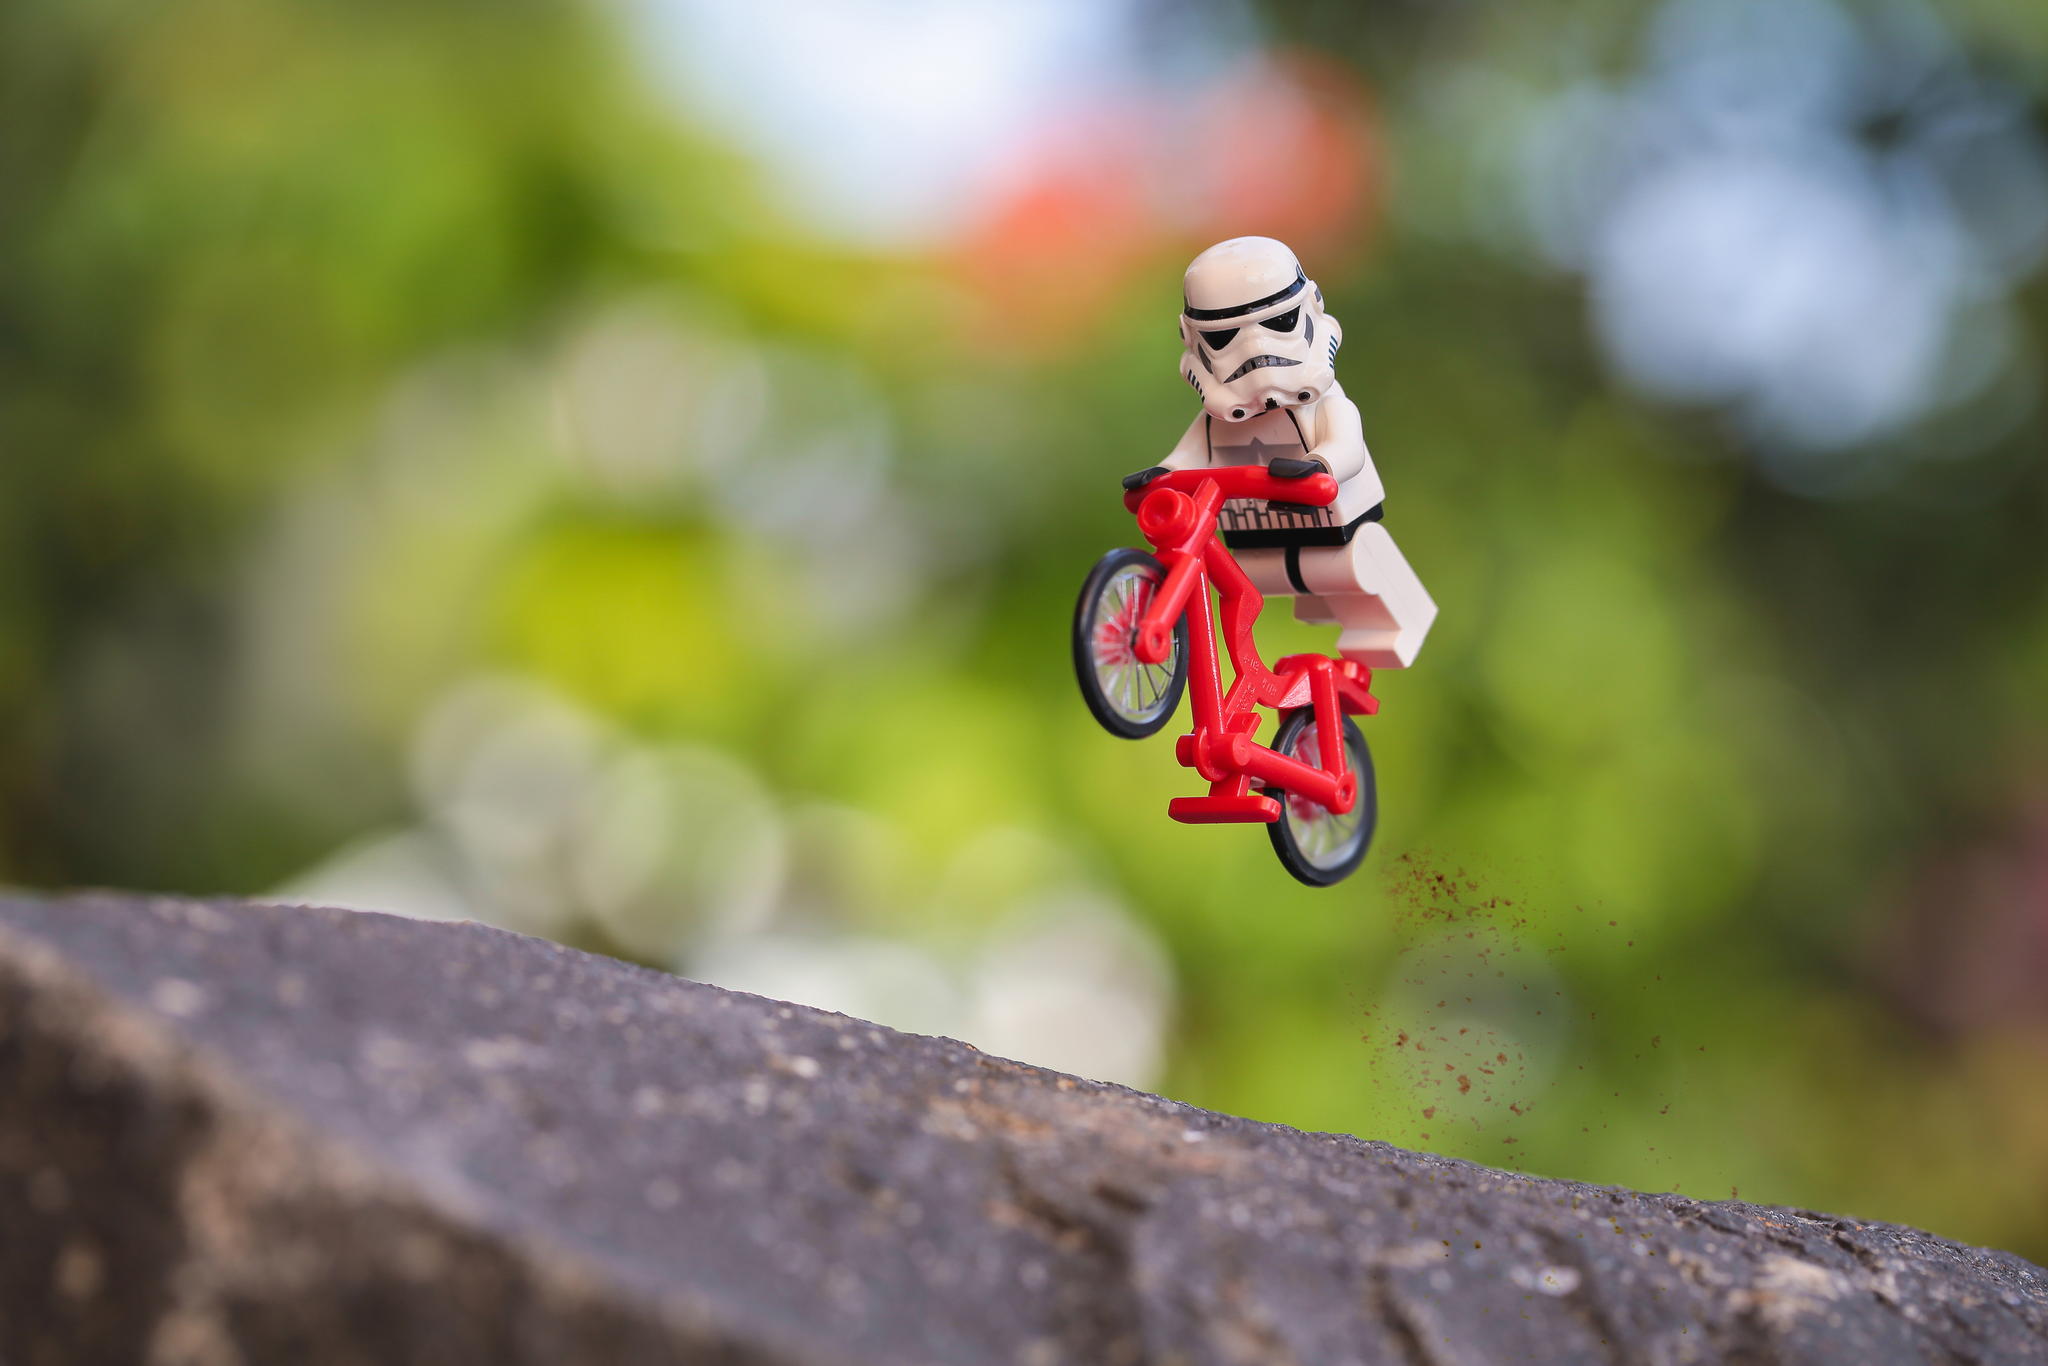 48+ Best Photos Of Stormtroopers Doing Awesome Things